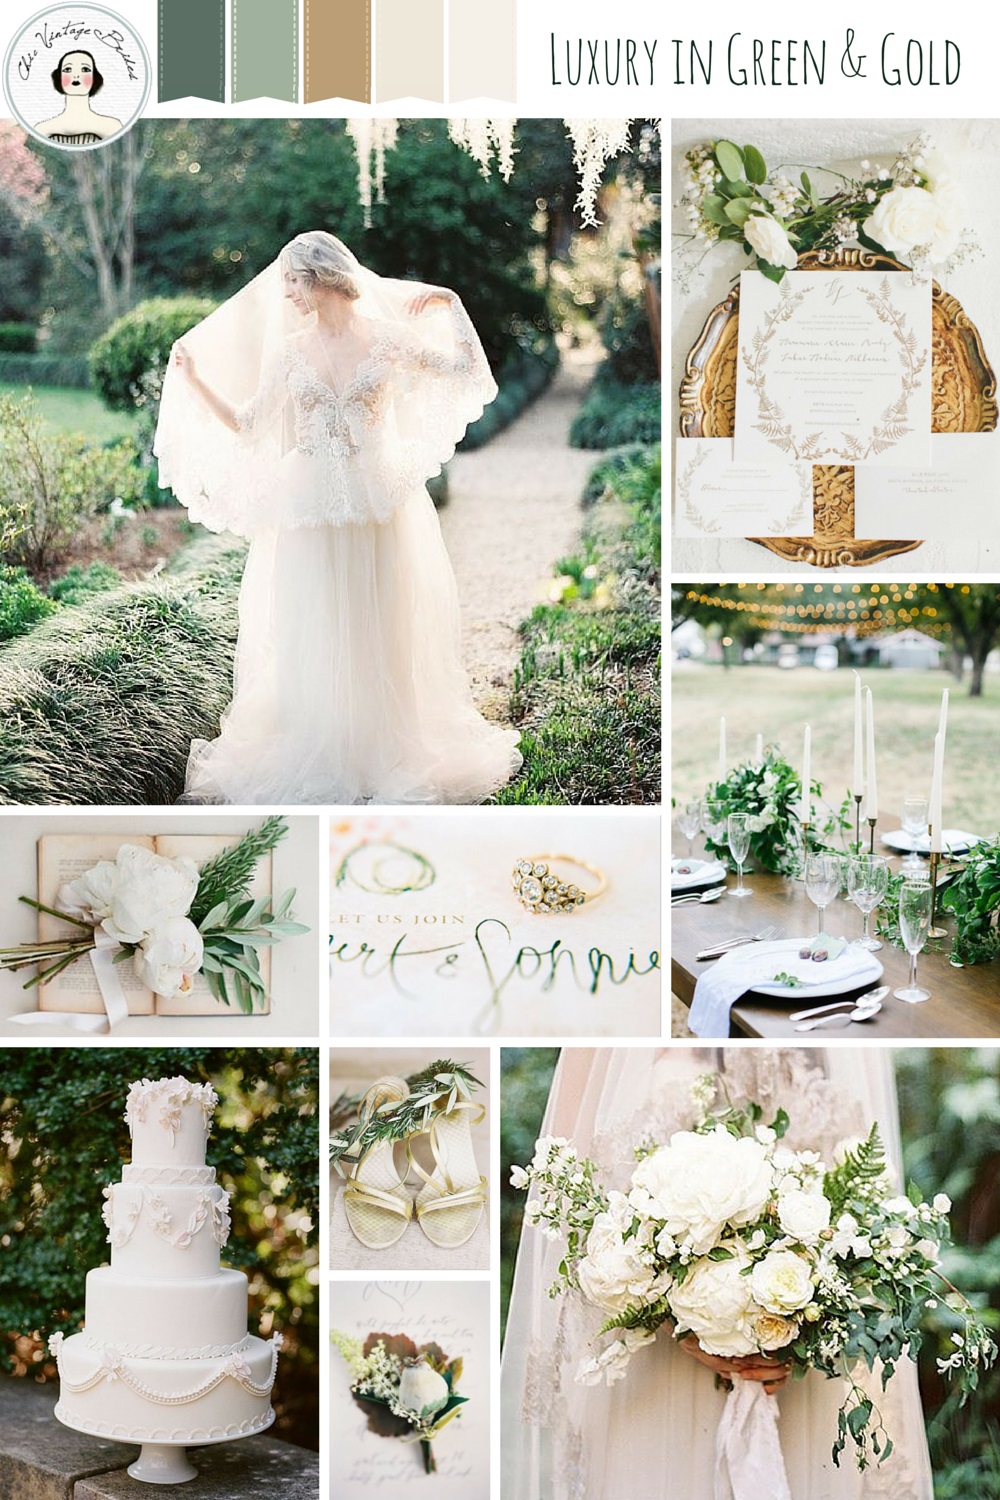 Romantic Wedding Inspiration Board in Shades of Green & Gold